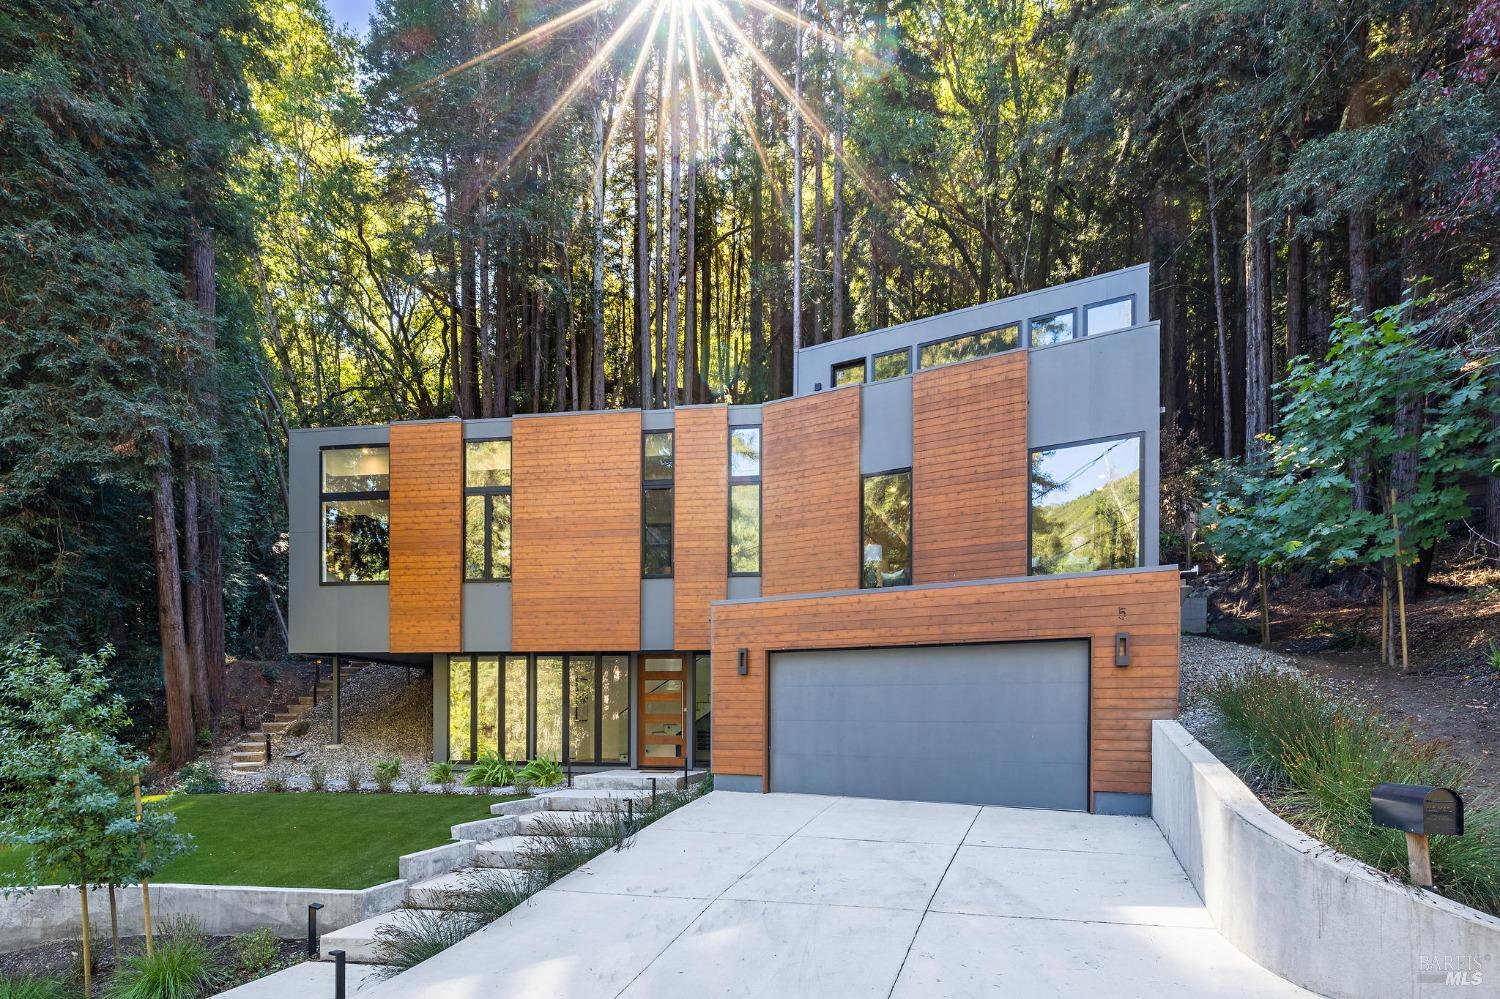 NEW CONSTRUCTION! 5 Tartan Road is nestled in front of a magical intimate and up-lit redwood grove and located around the corner from the coveted Scott Highlands playground, trailheads, and the Mill Valley Golf Course. Phenomenal floorplan. Exterior cedar siding against the cool grey facade brings warmth to a fun and modern facade. Tremendous scale and easy layout. Designer finishes at every turn. Oversized windows and large walls of glass bring the outside in. The open-concept kitchen is straight out of a magazine, boasting high-end appliances and imported Italian cabinetry. Tasteful walnut accents. Ample walk-in pantry and great storage throughout. Large wine display and curated interior design. Two folding walls of glass open to outdoor spaces for playing and al fresco dining. Luxurious primary suite with private balcony. Multi-zone AC and great location. Attached two car garage. Architecture by Richardson Pribuss AIA.